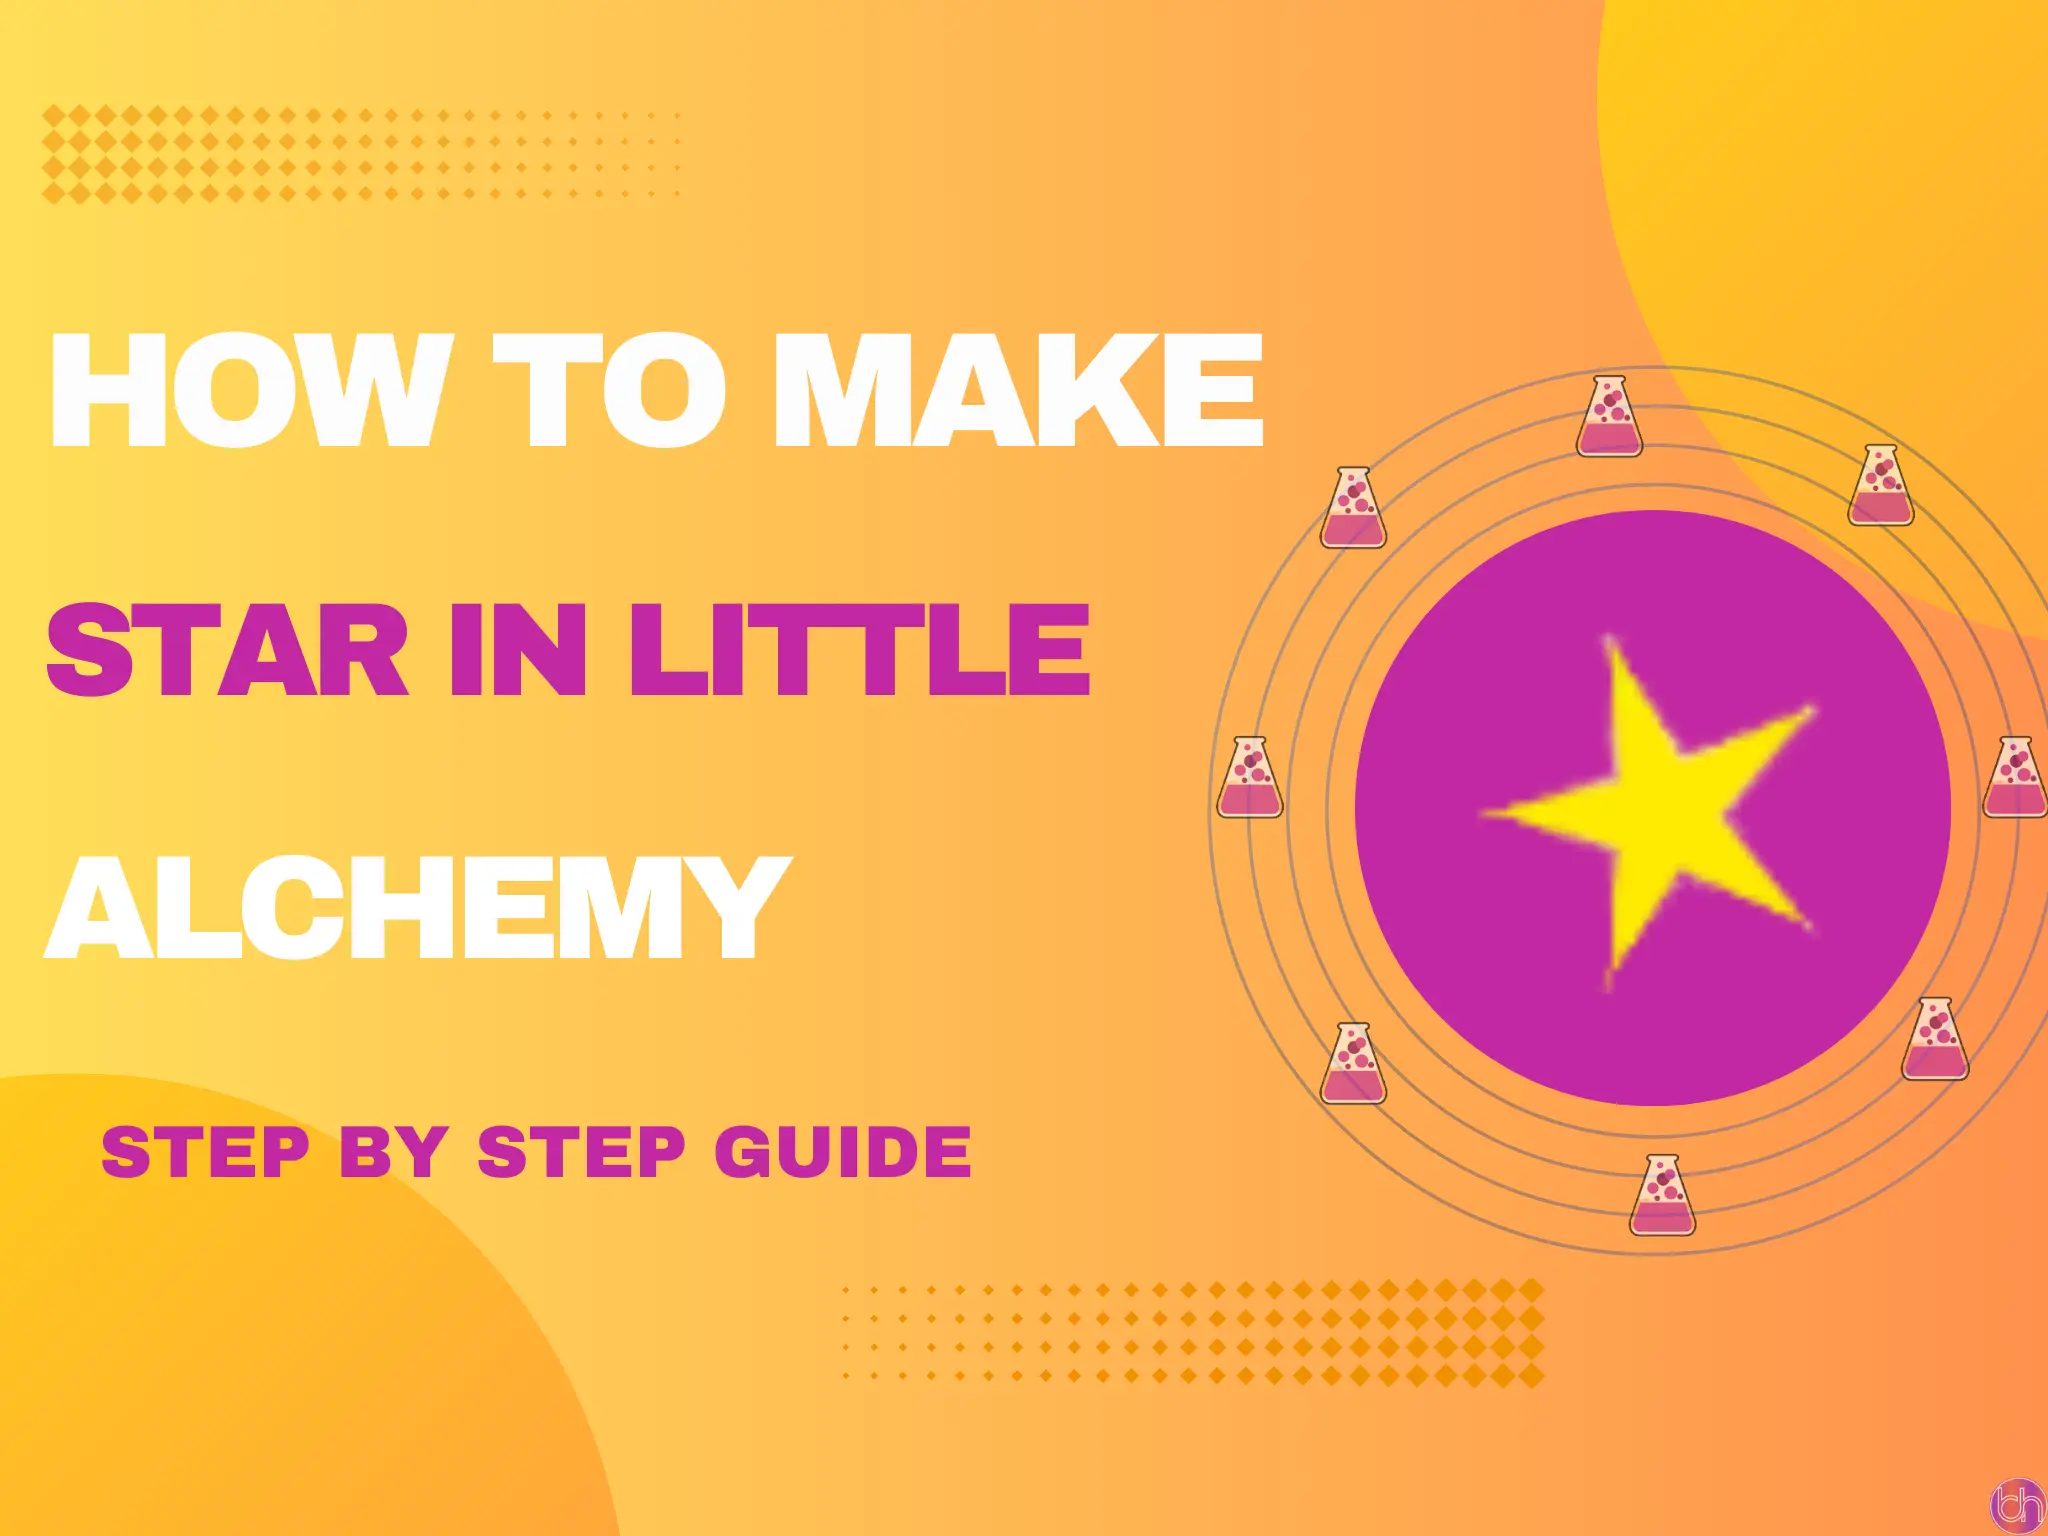 How to make Star in little alchemy